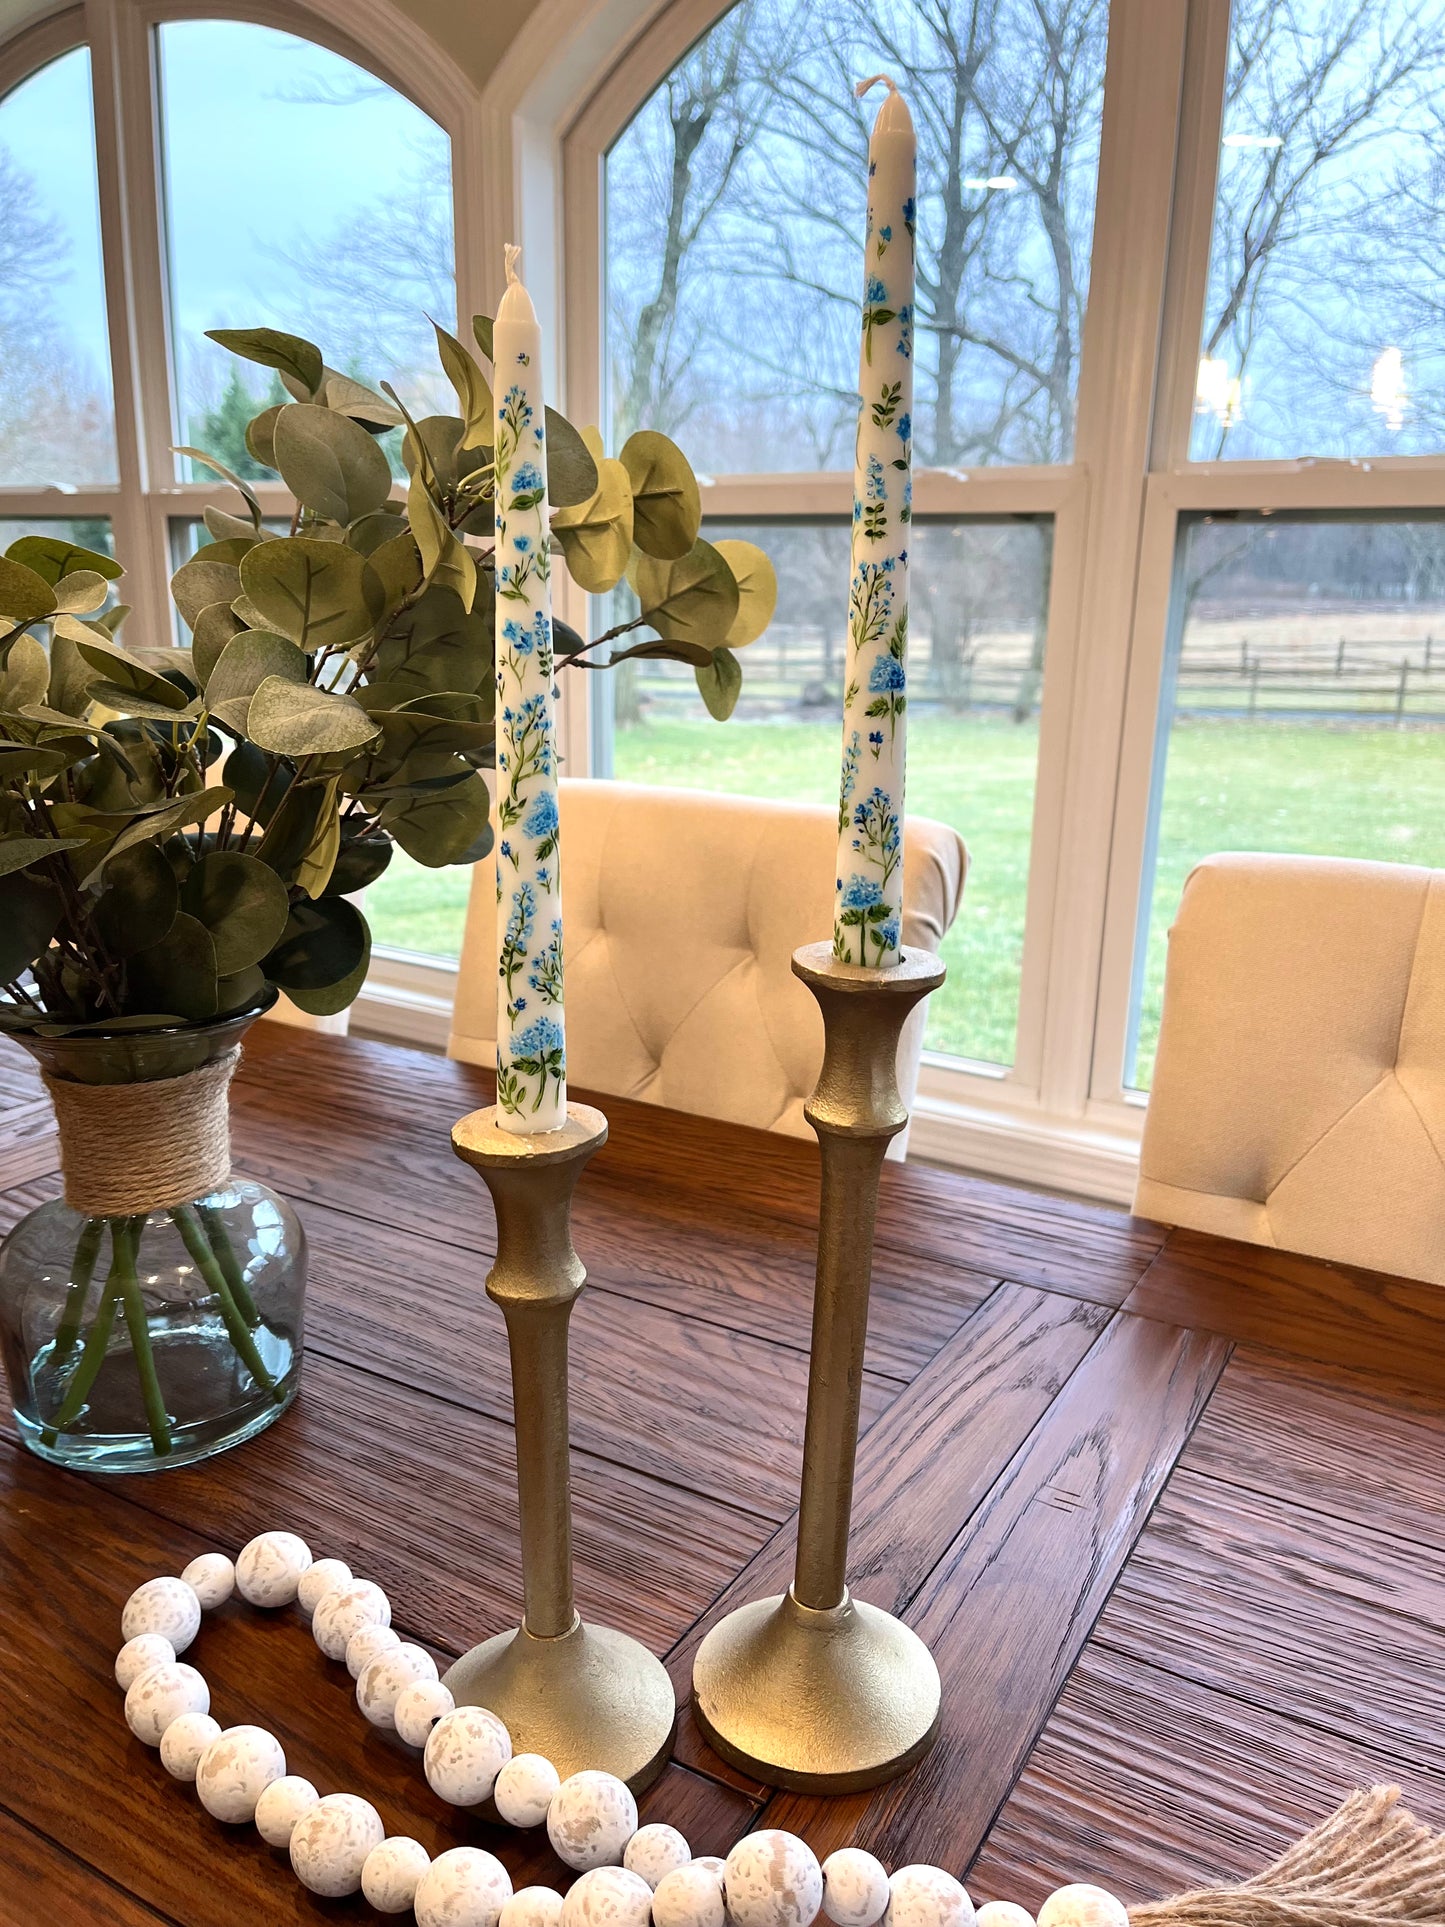 ivory & blue wildflower hand-painted candlesticks